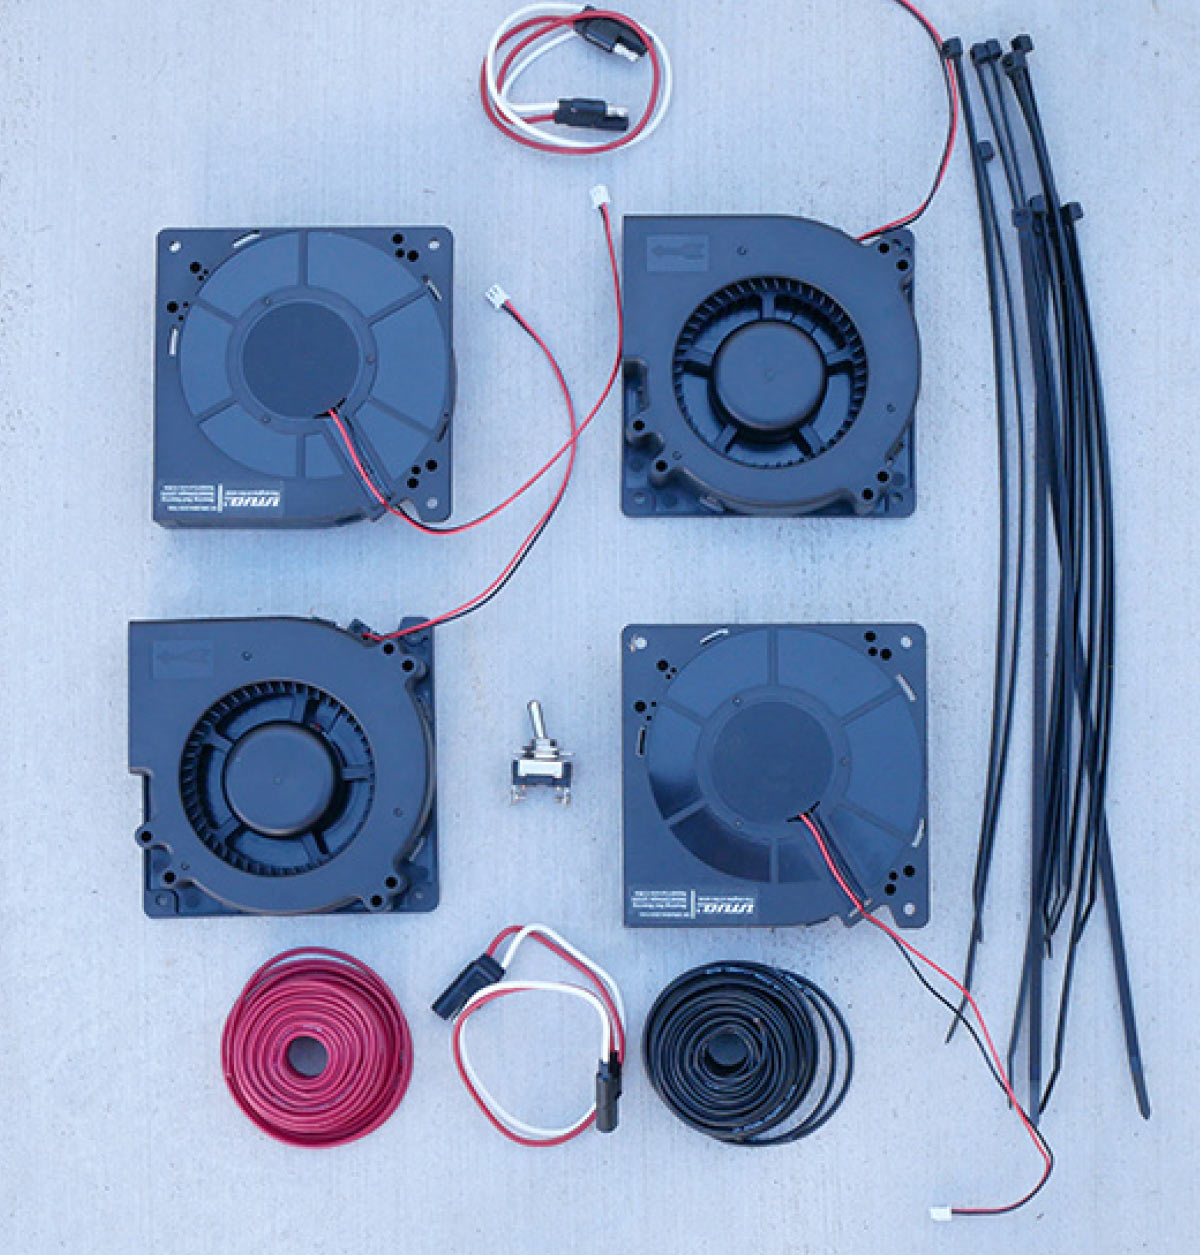 blower fans, wire, two-pin connectors and cable ties